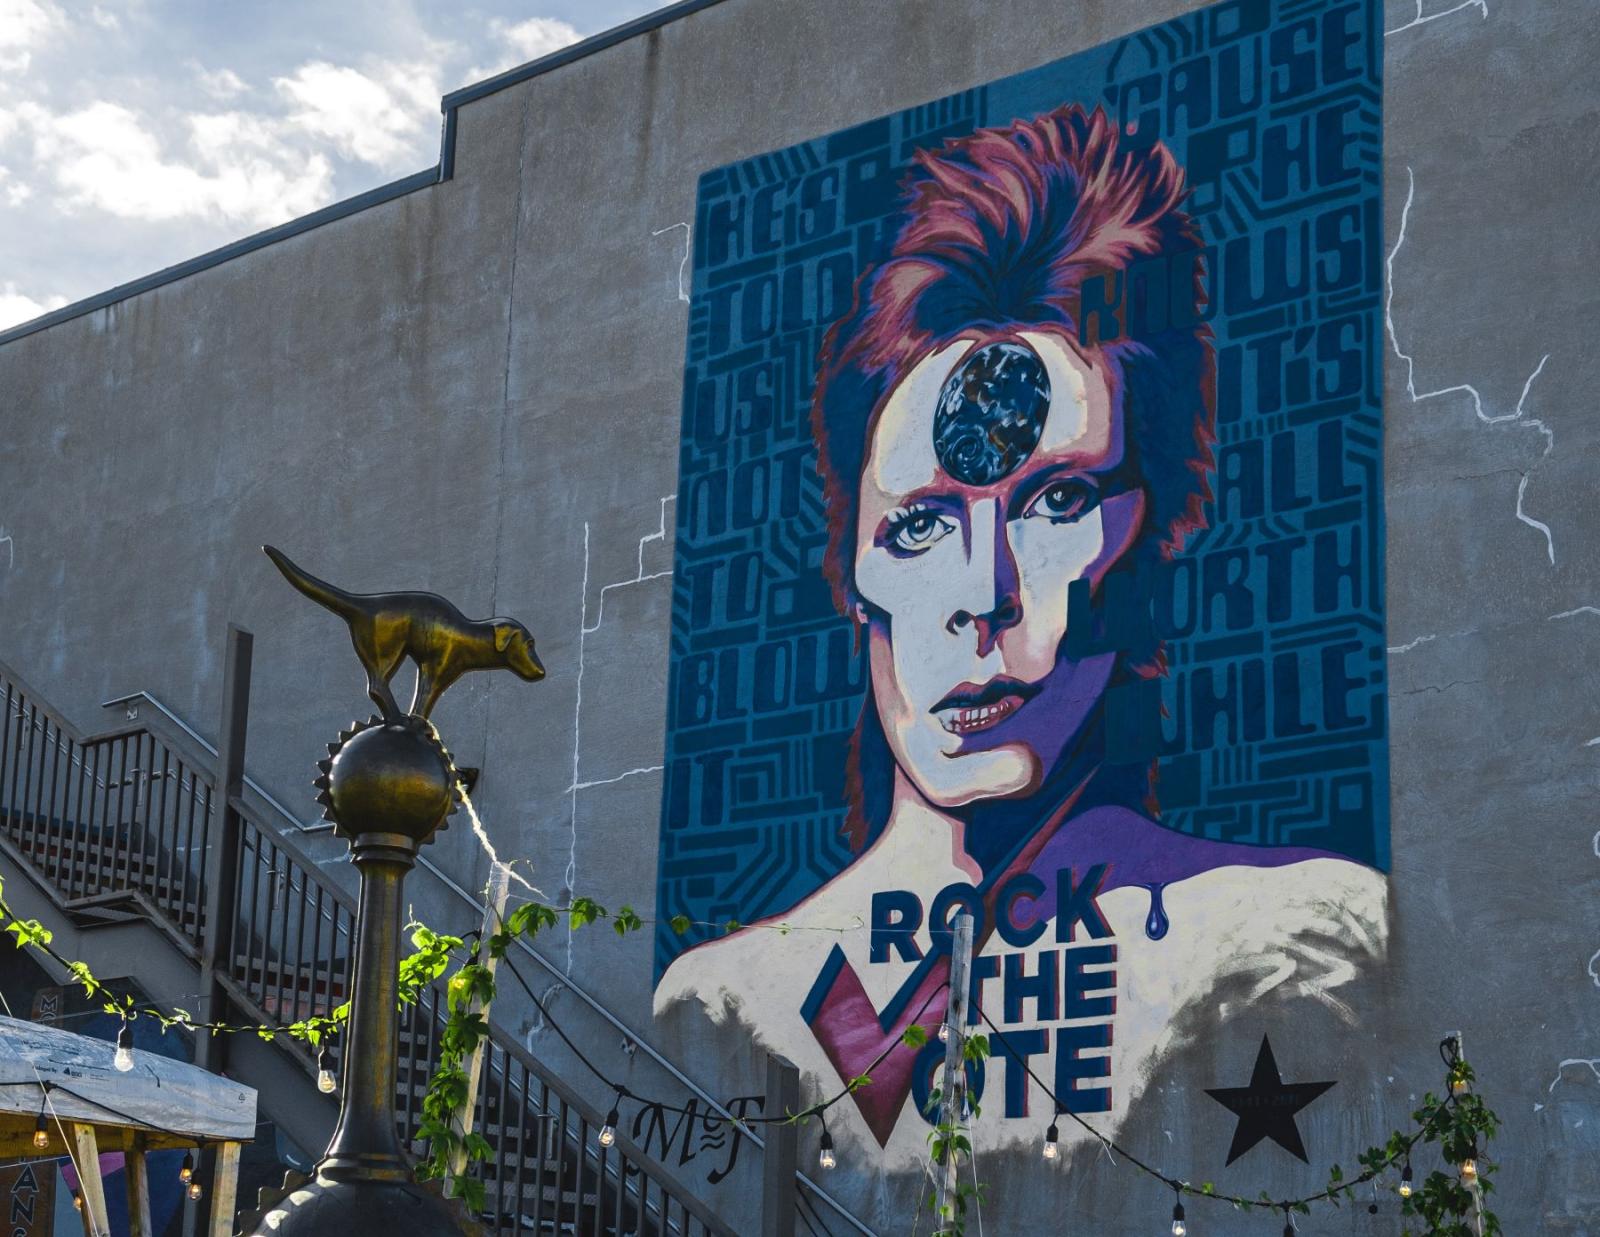 mural of a man with the words "rock the vote" on his chest